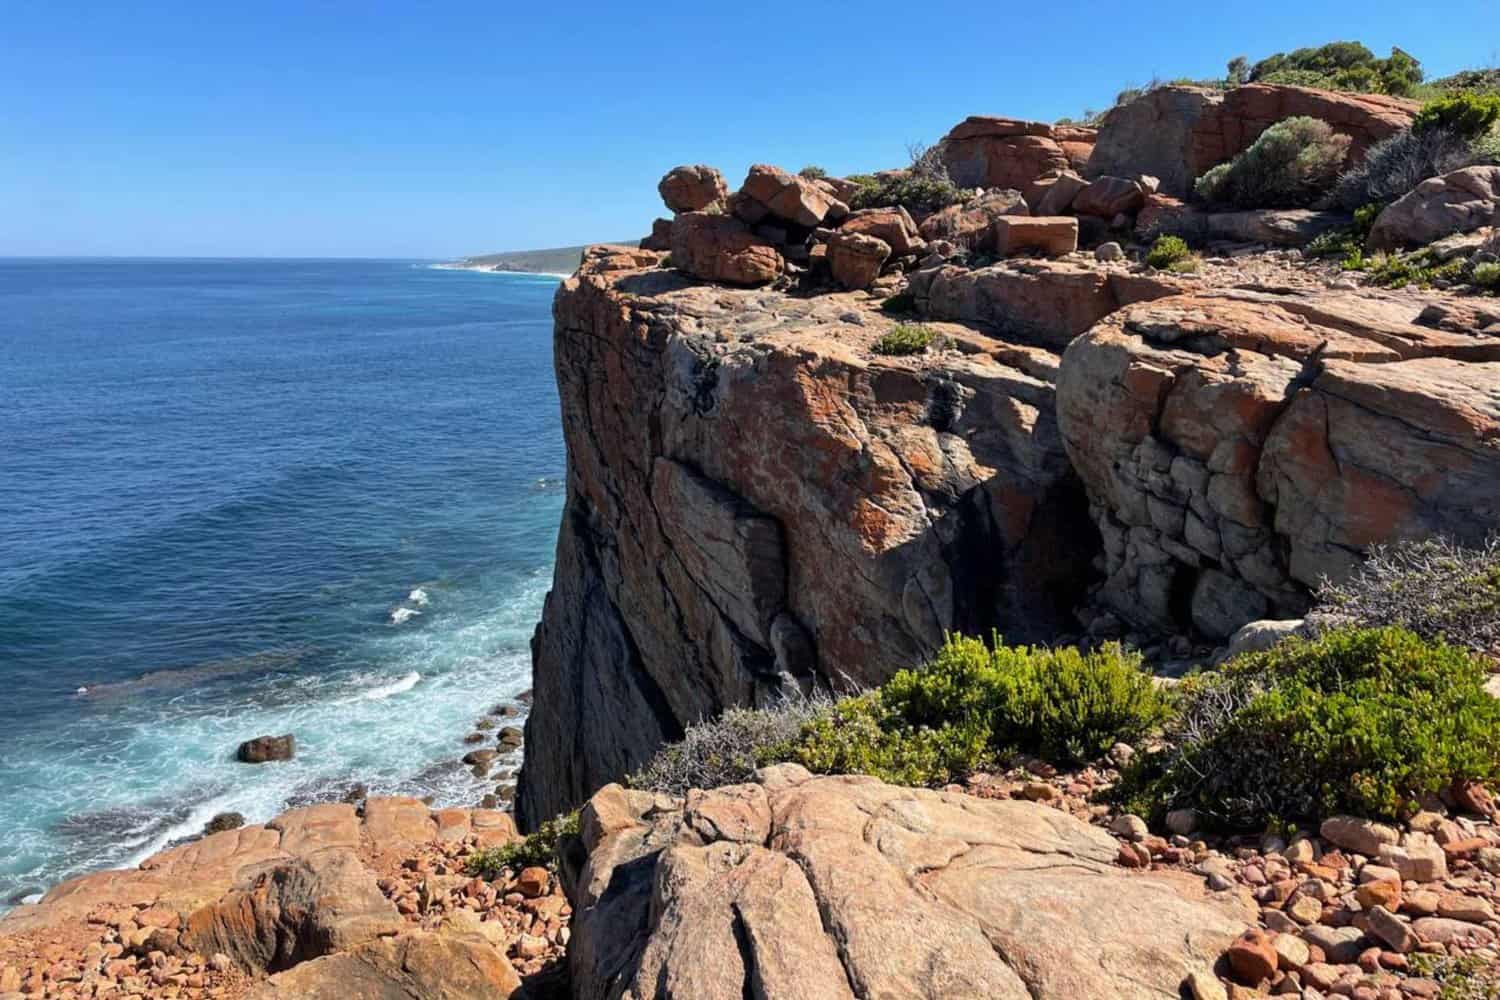 Scenic view of the rugged Wilyabrup sea cliffs along the coastline, with layered rock formations and shrubs overlooking the azure ocean waves, under a clear blue sky.